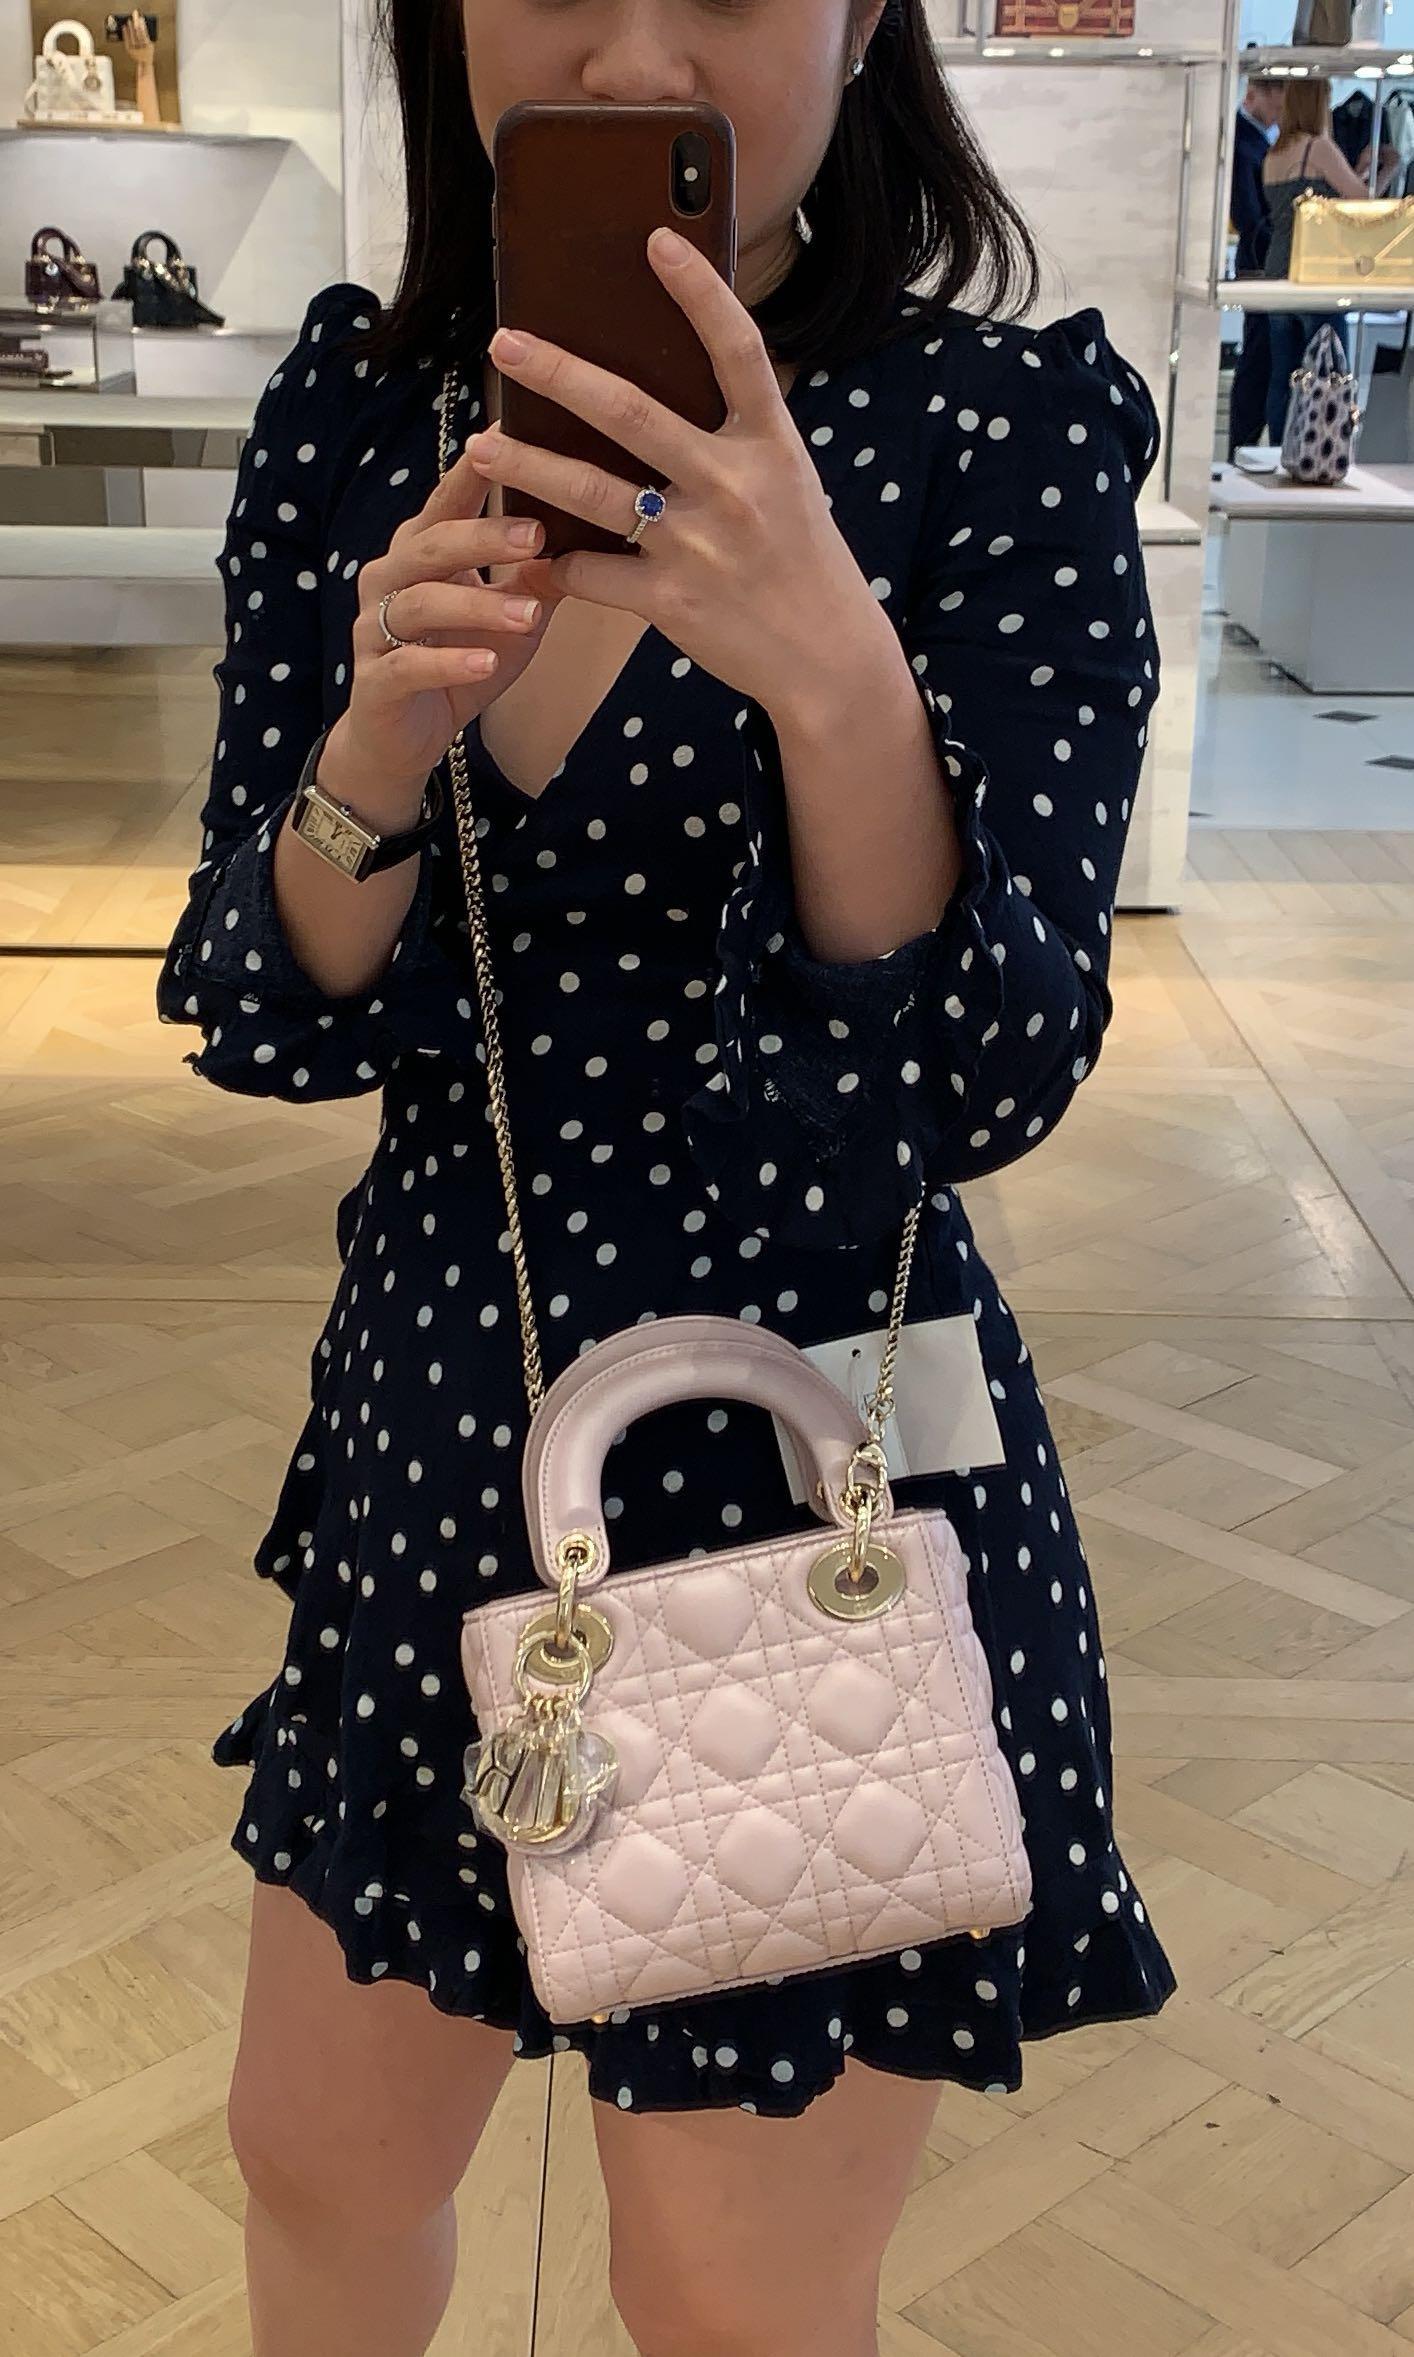 Lady Dior Mini Outfit on Sale, SAVE 47% 